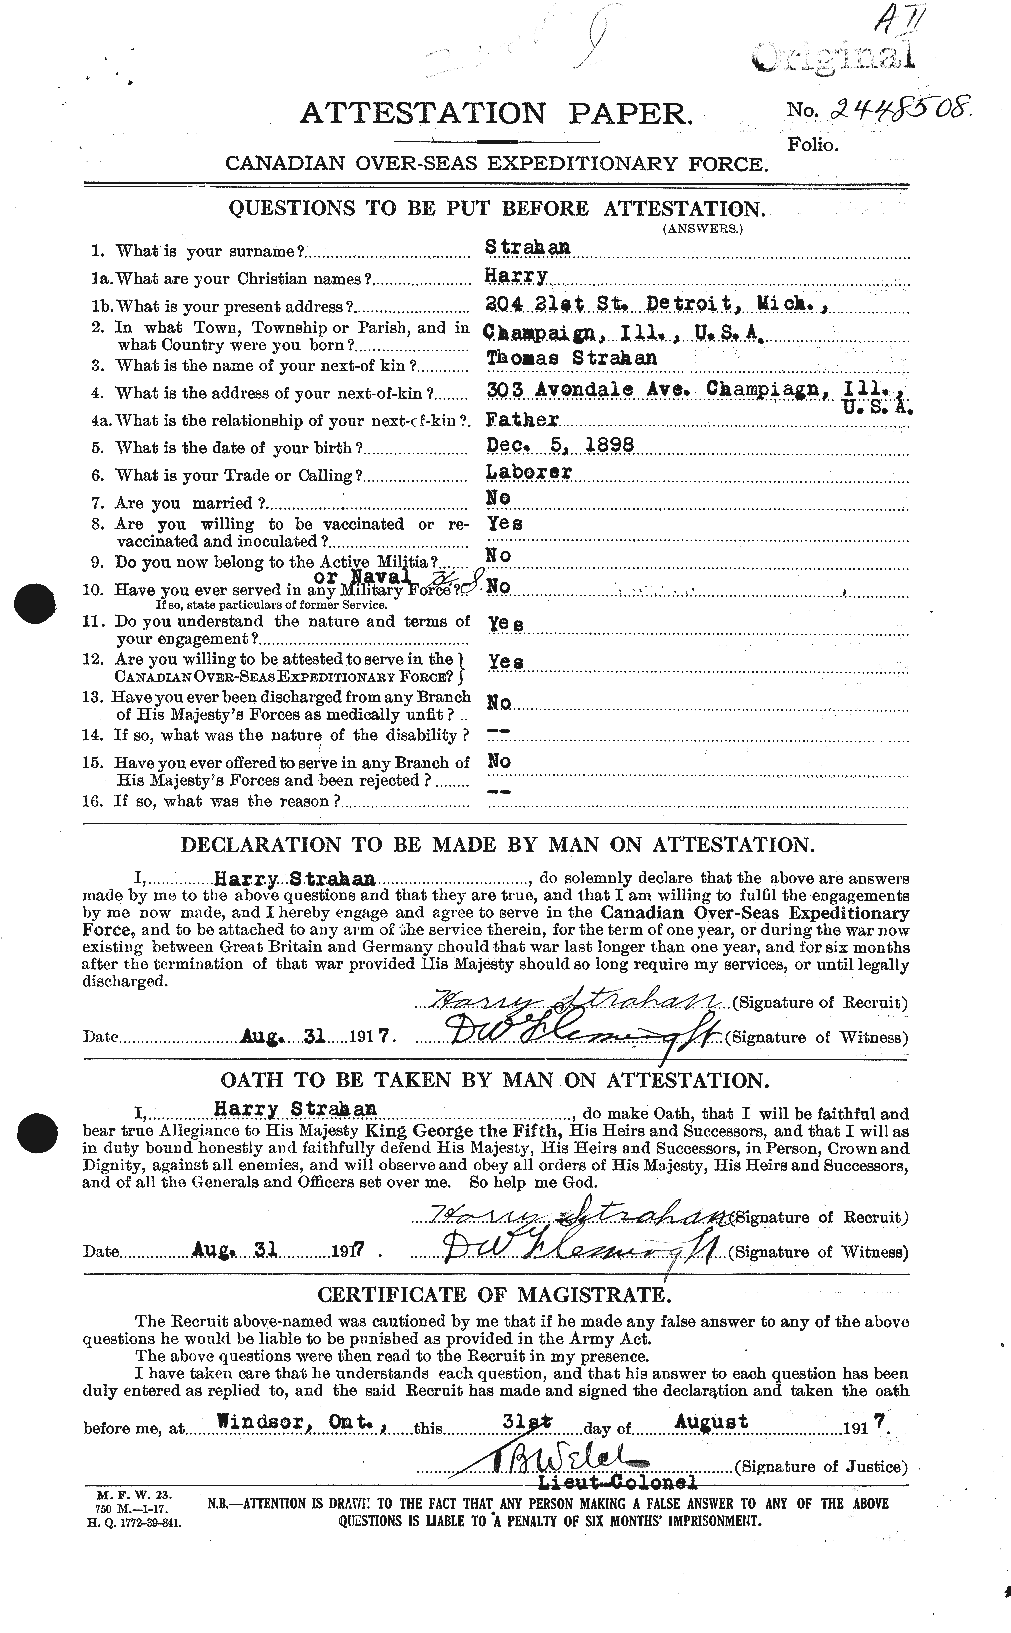 Personnel Records of the First World War - CEF 121682a